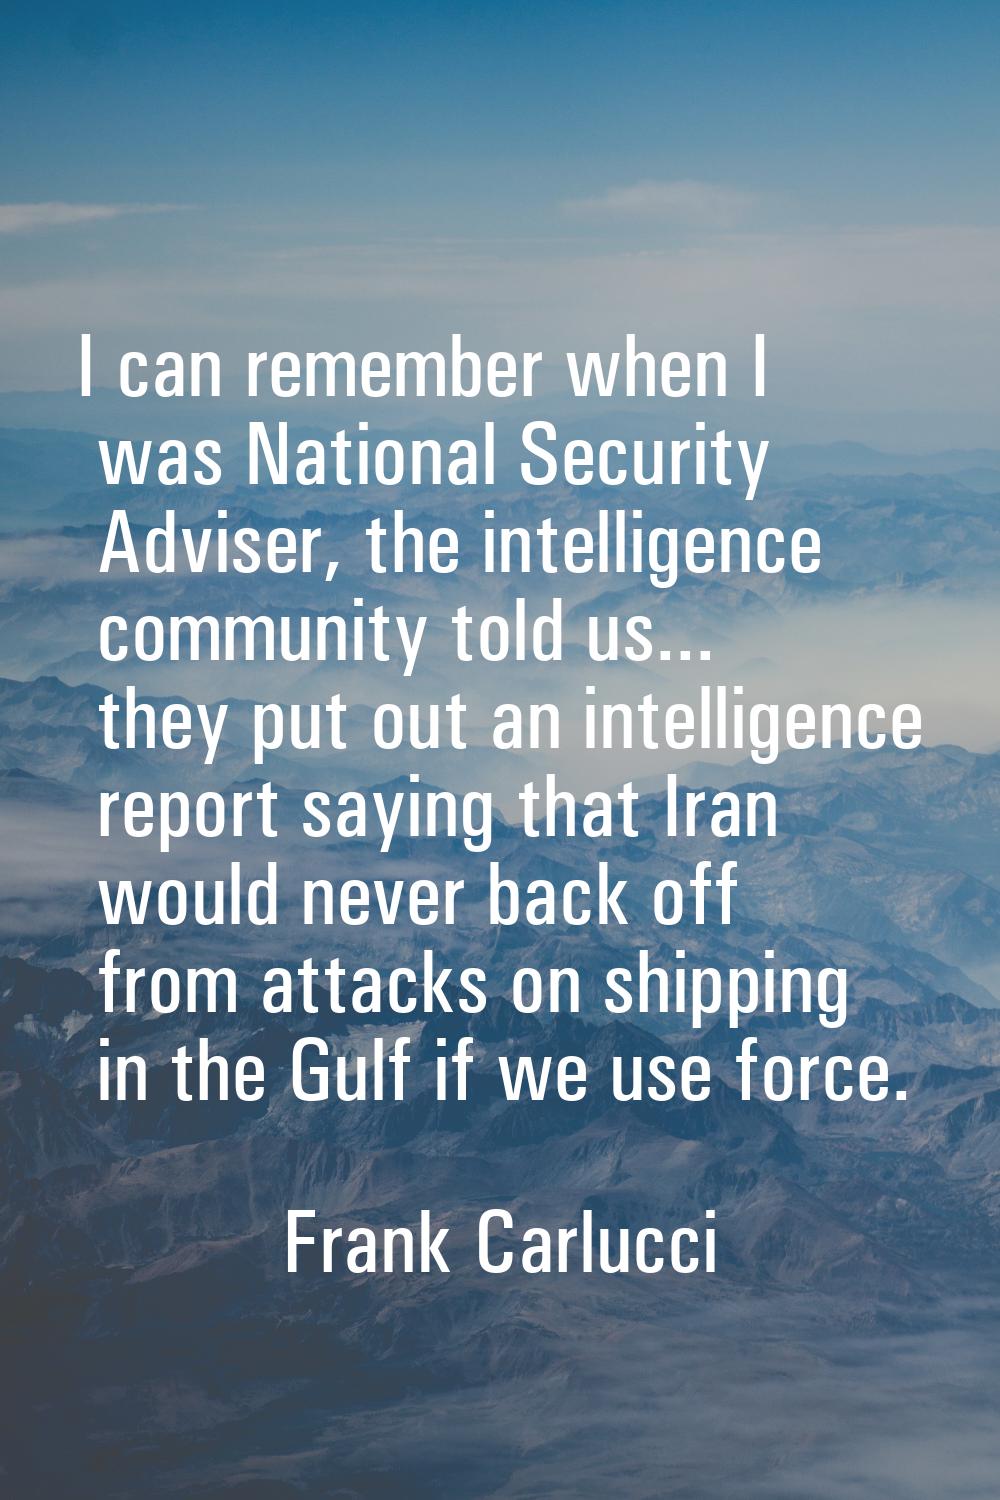 I can remember when I was National Security Adviser, the intelligence community told us... they put